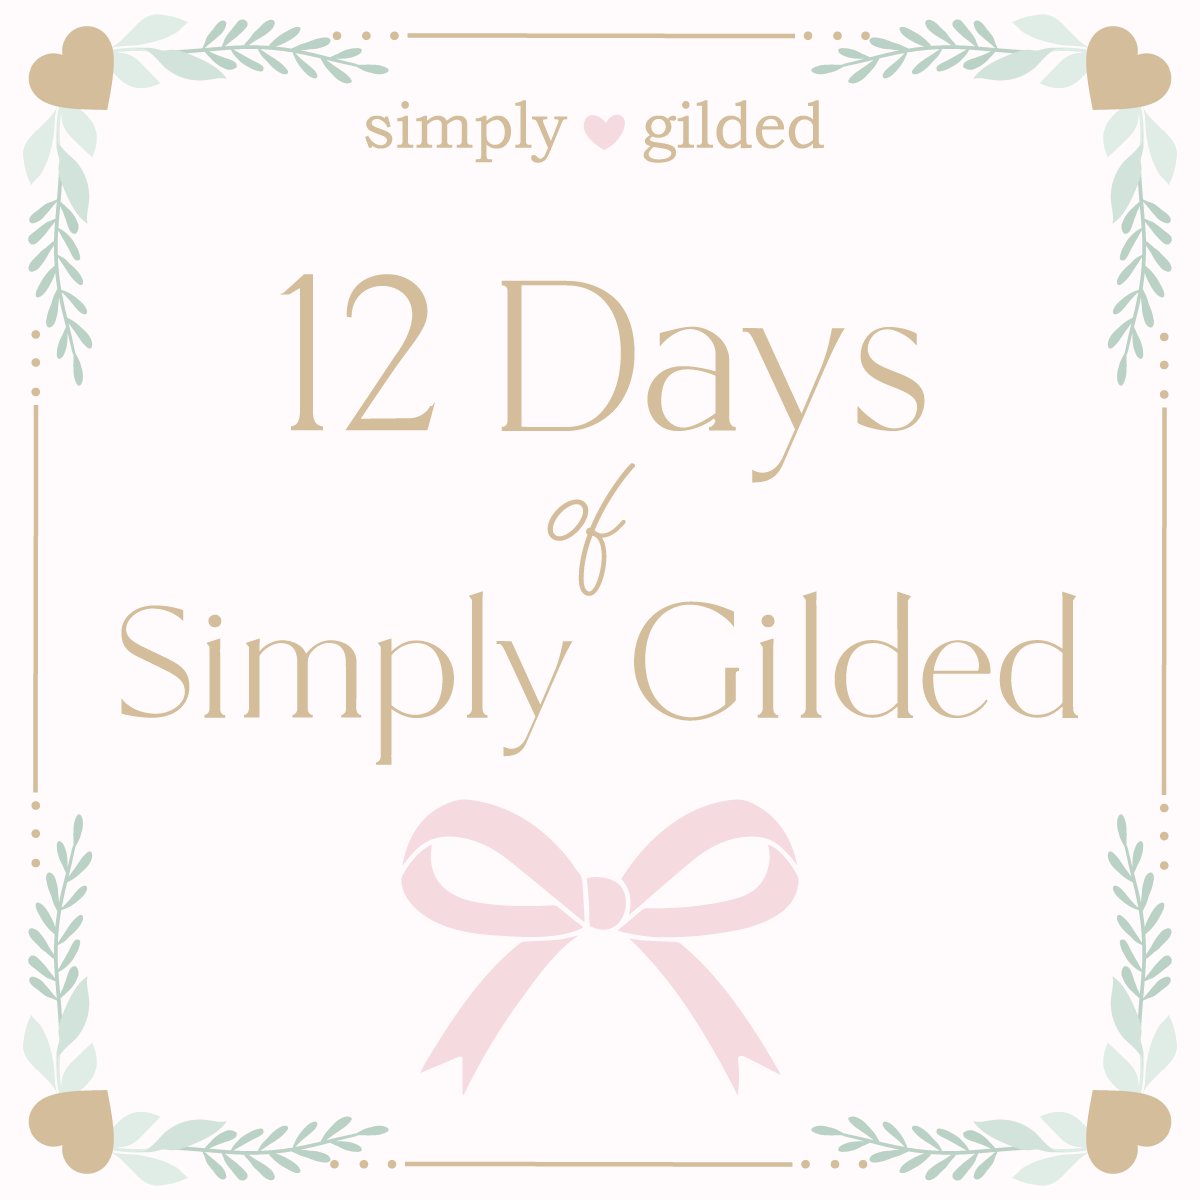 12 days of simply gilded